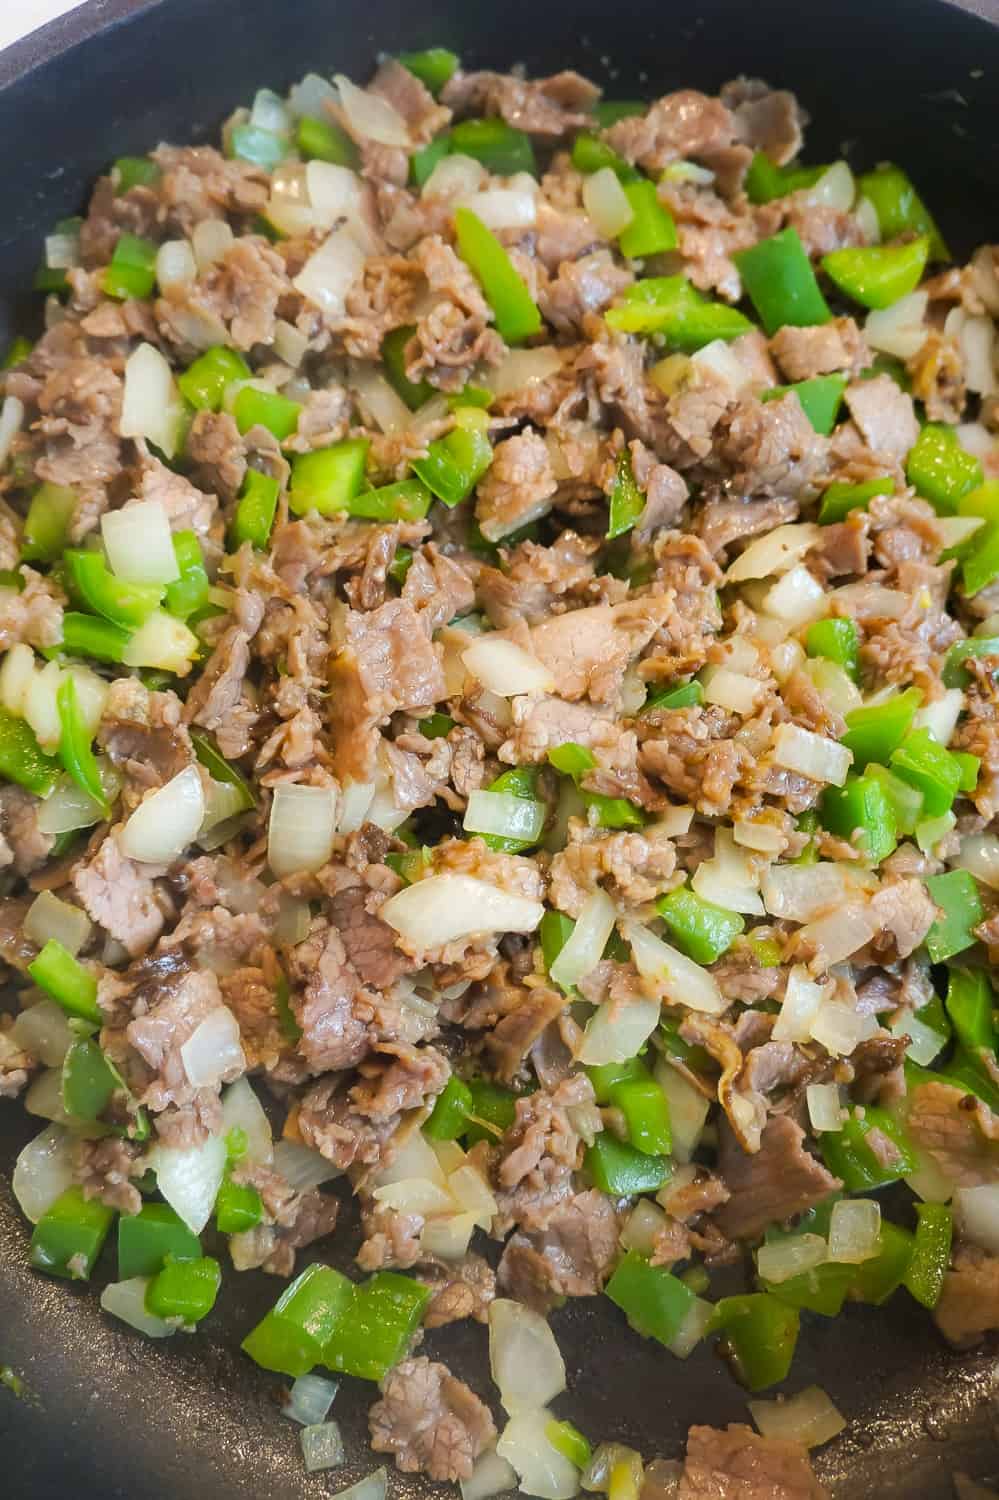 diced roast beef, diced green onions and diced onions in a frying pan